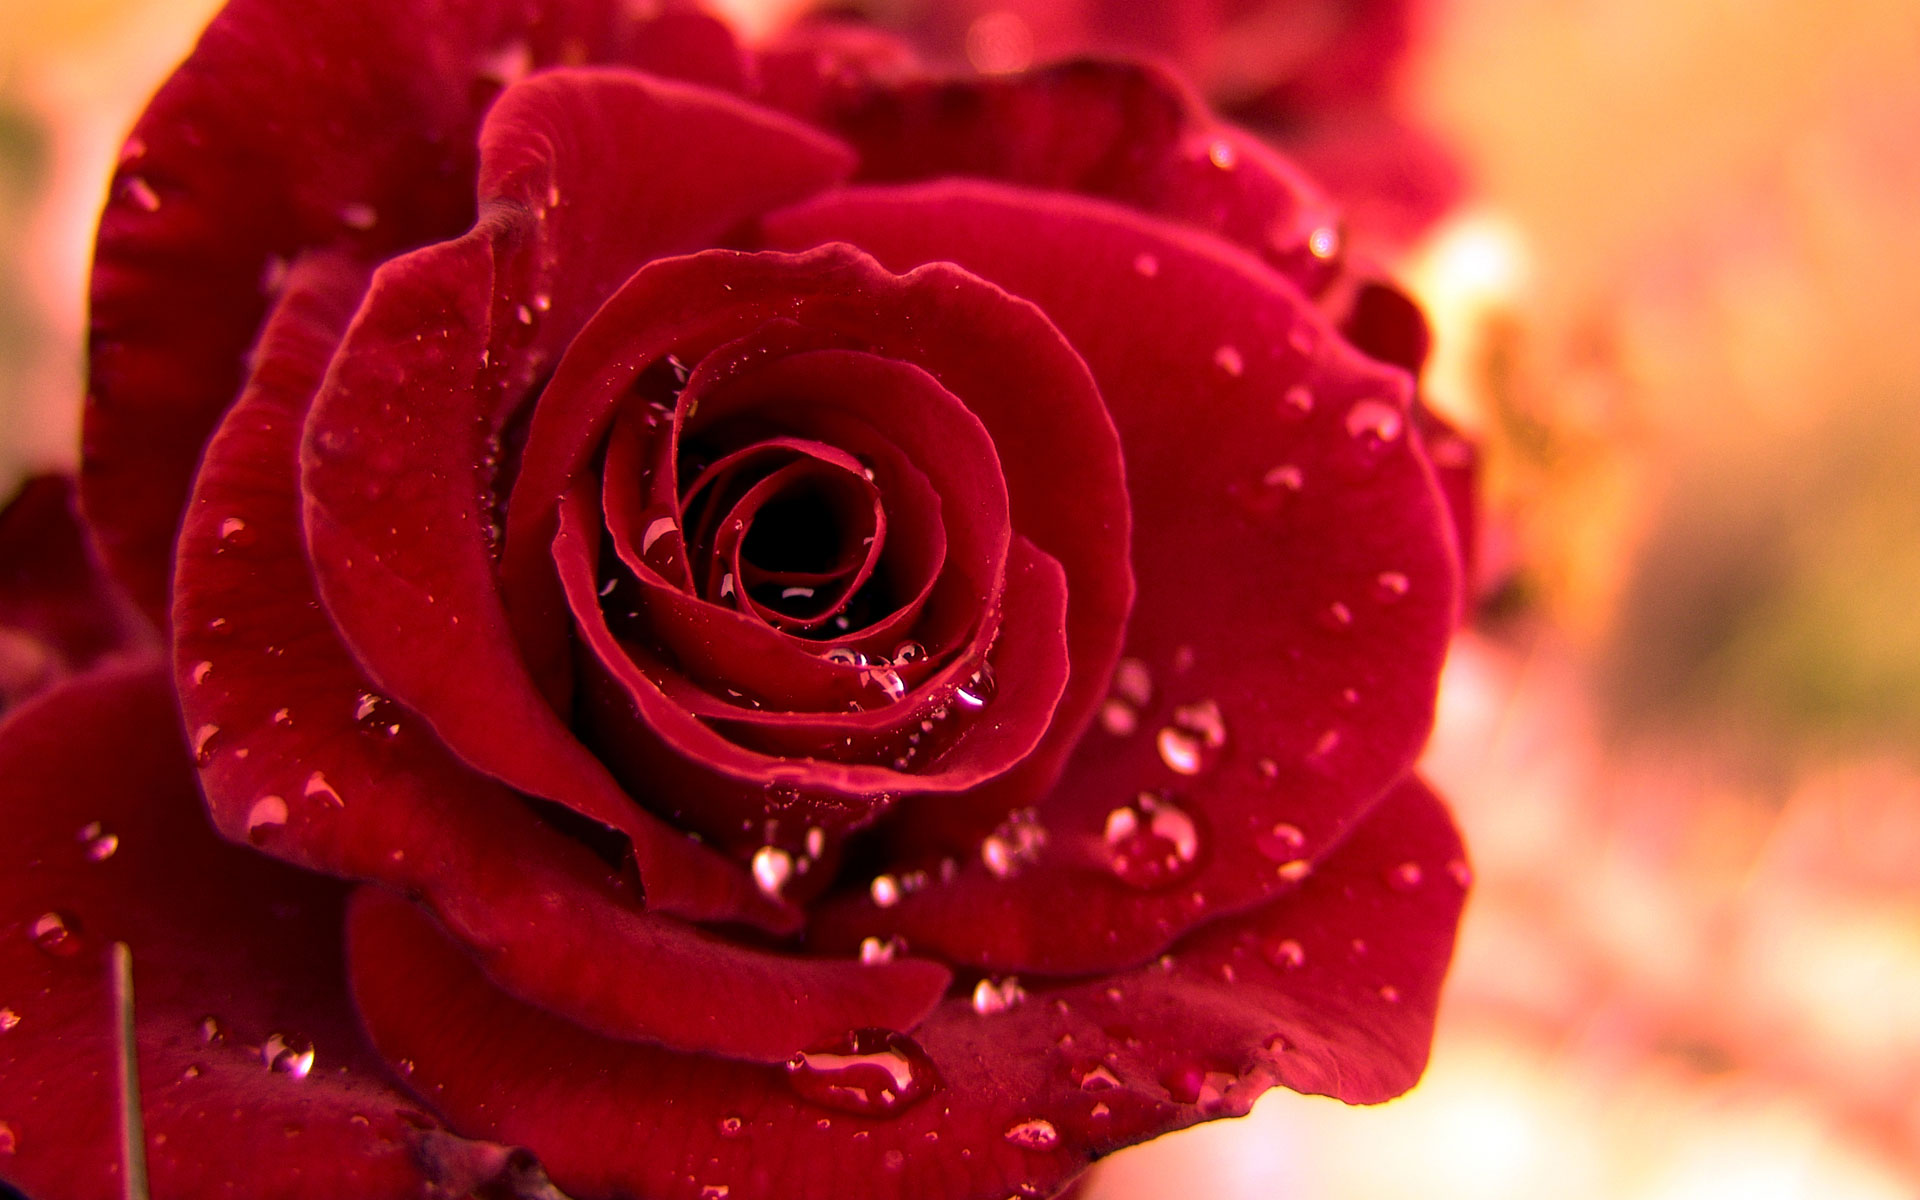 rose images photos wallpapers,flower,garden roses,flowering plant,red,petal